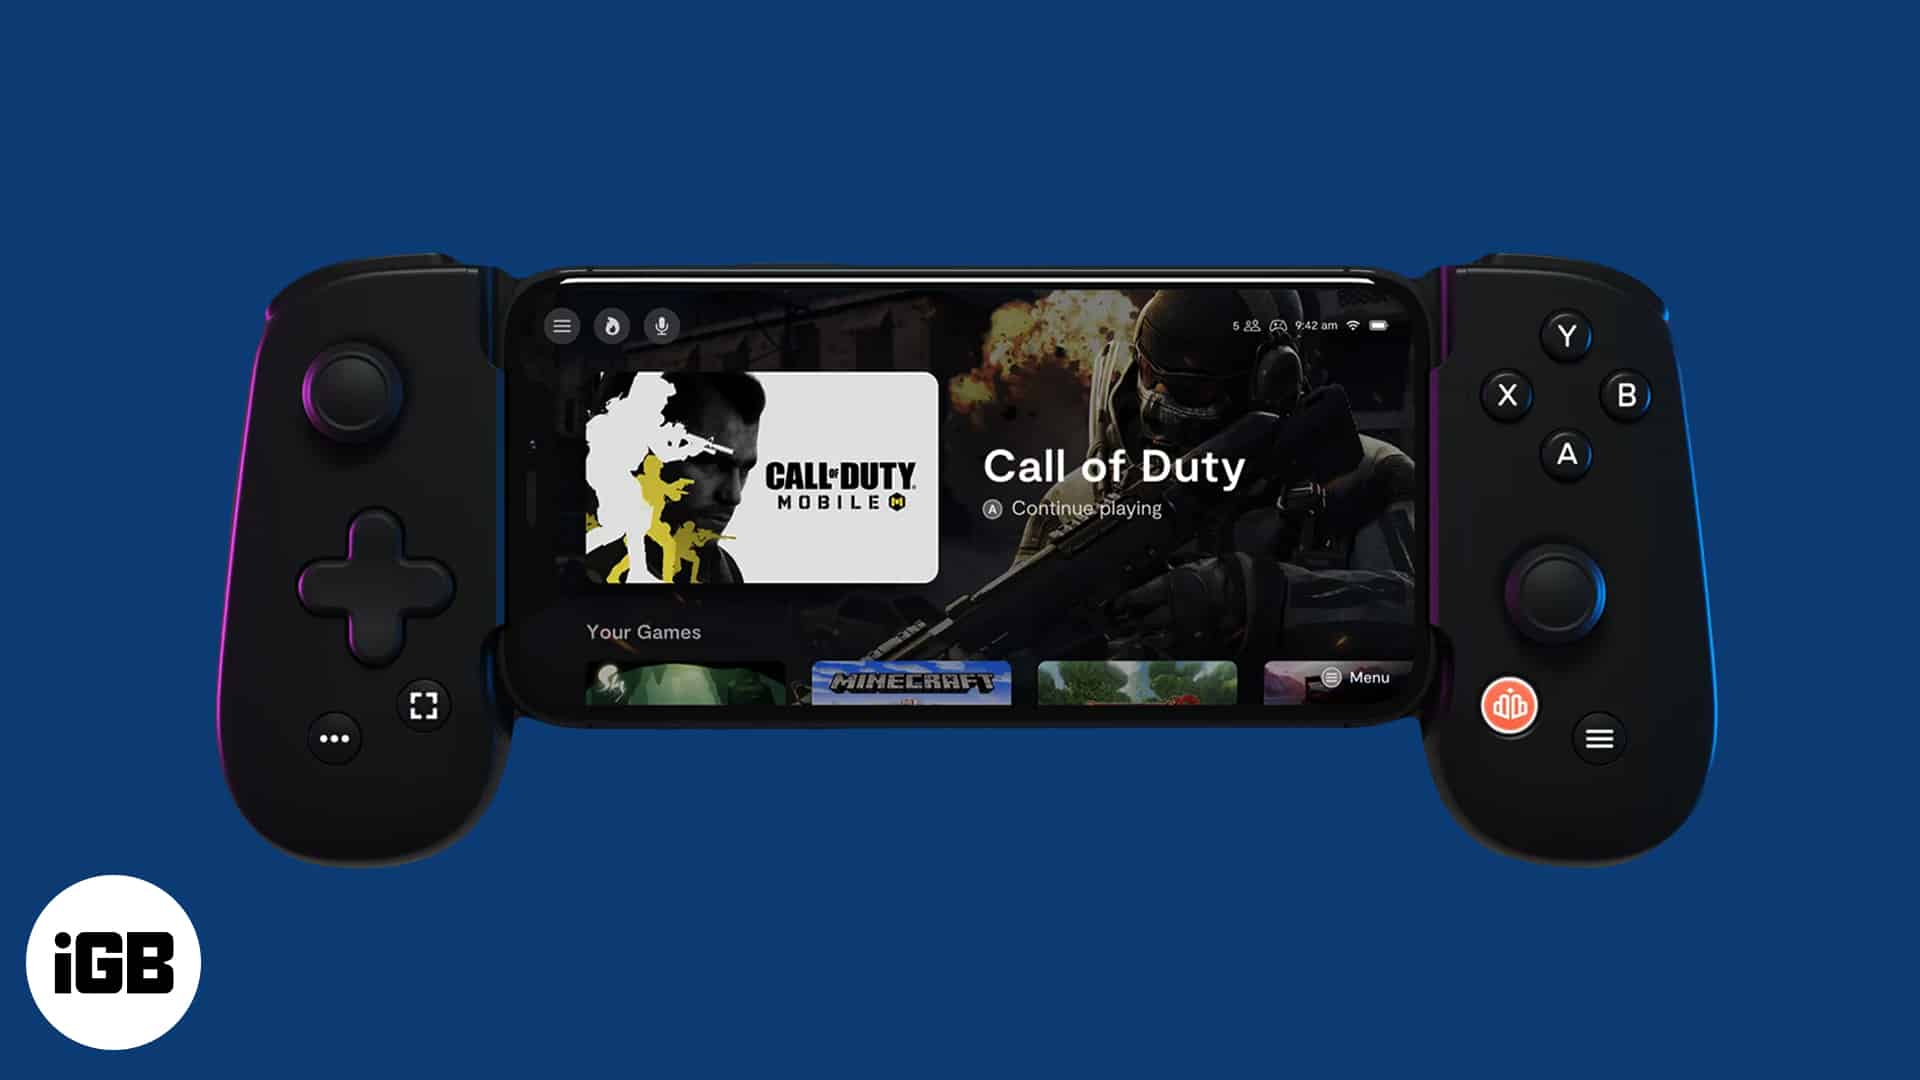 Pligt manifestation mock How to play PS5 or PS4 games on iPhone using Remote Play - iGeeksBlog